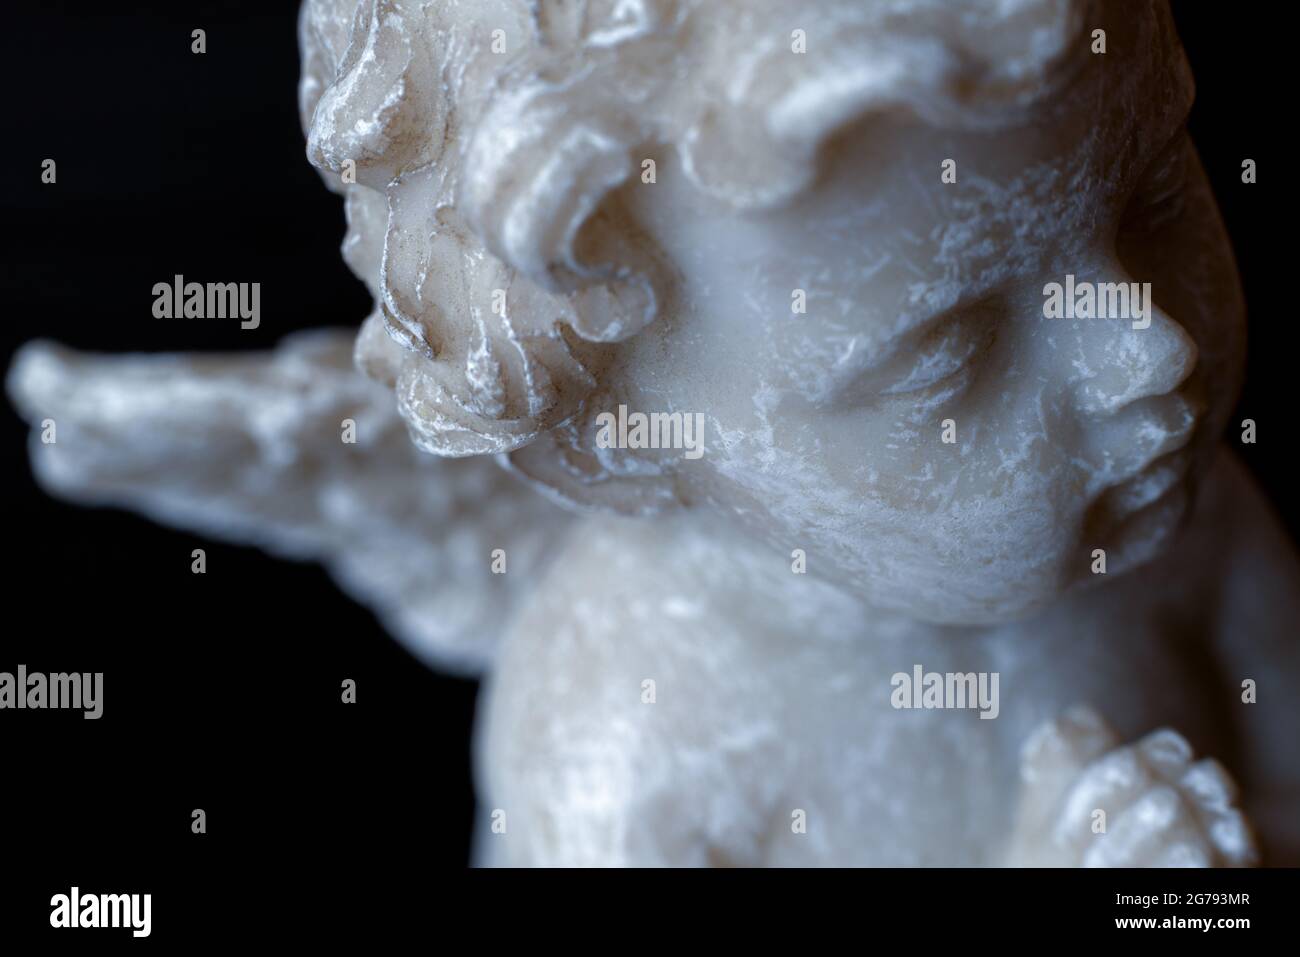 A part of white angel statue on black background Stock Photo